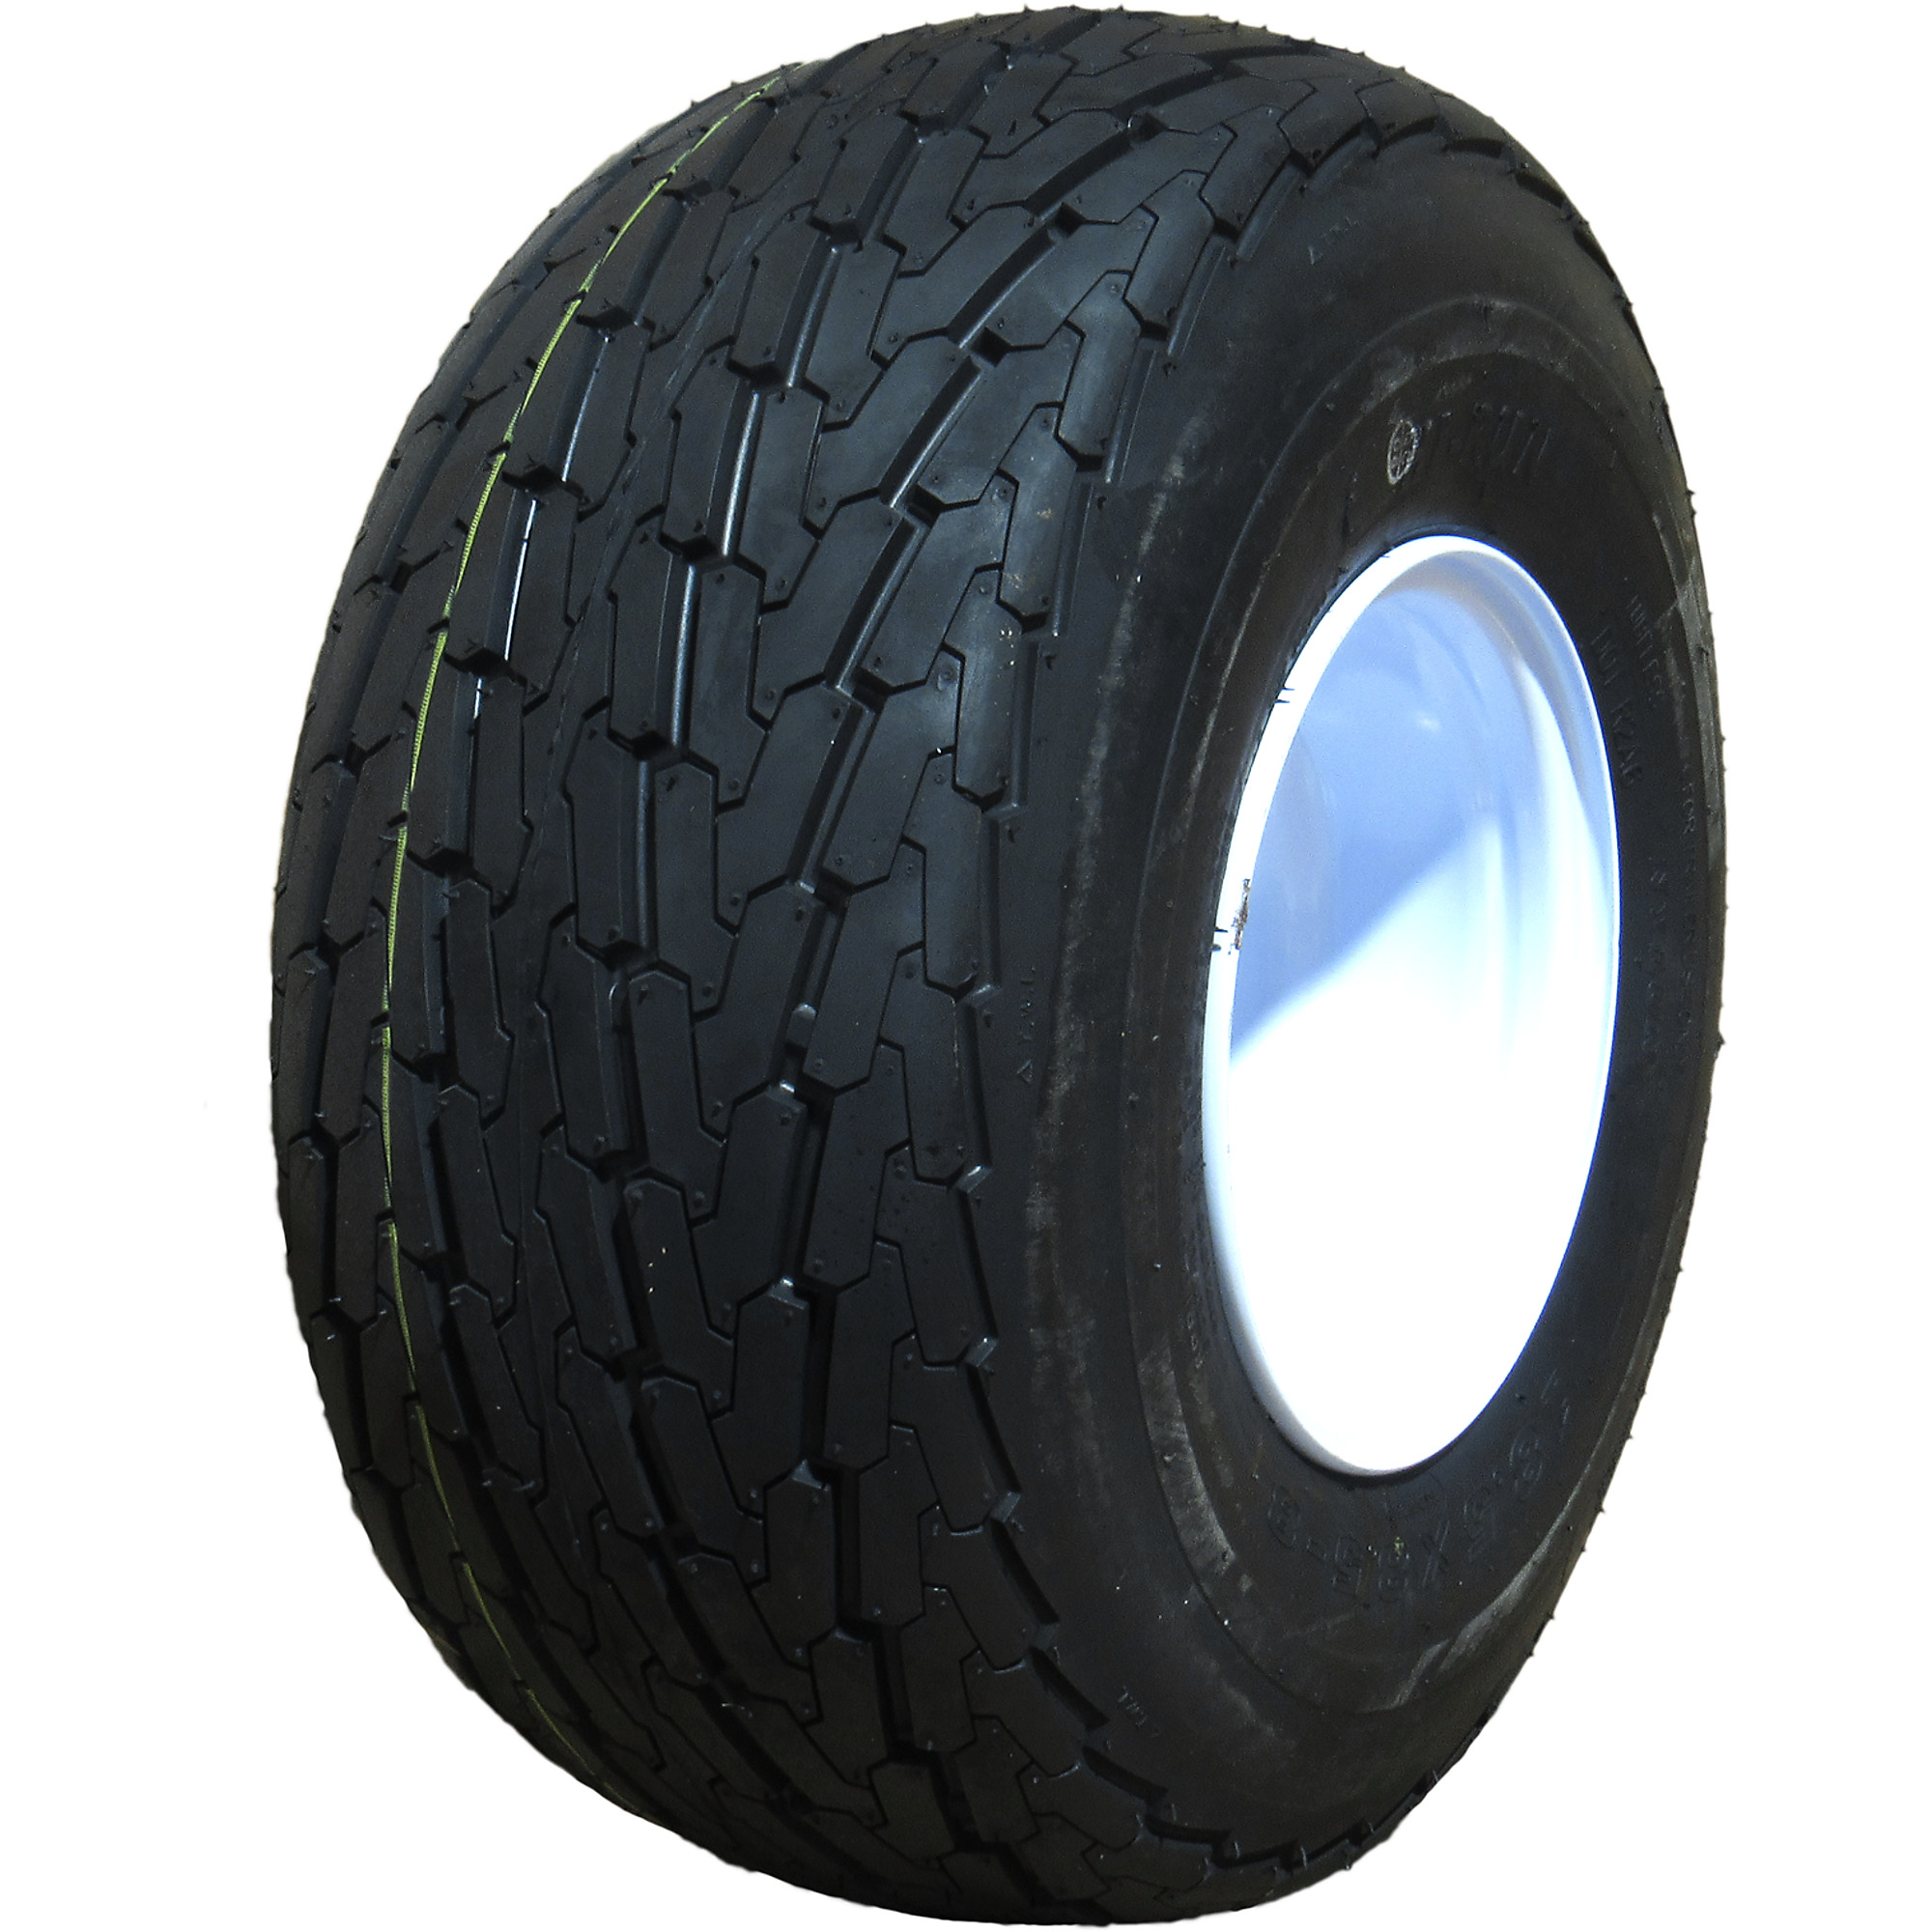 HI-RUN, Highway Trailer Tire Assembly, Bias-Ply, Tire Size 18.5X8.5-8 Load Range Rating C, Bolt Holes (qty.) 4 Model ASB1028